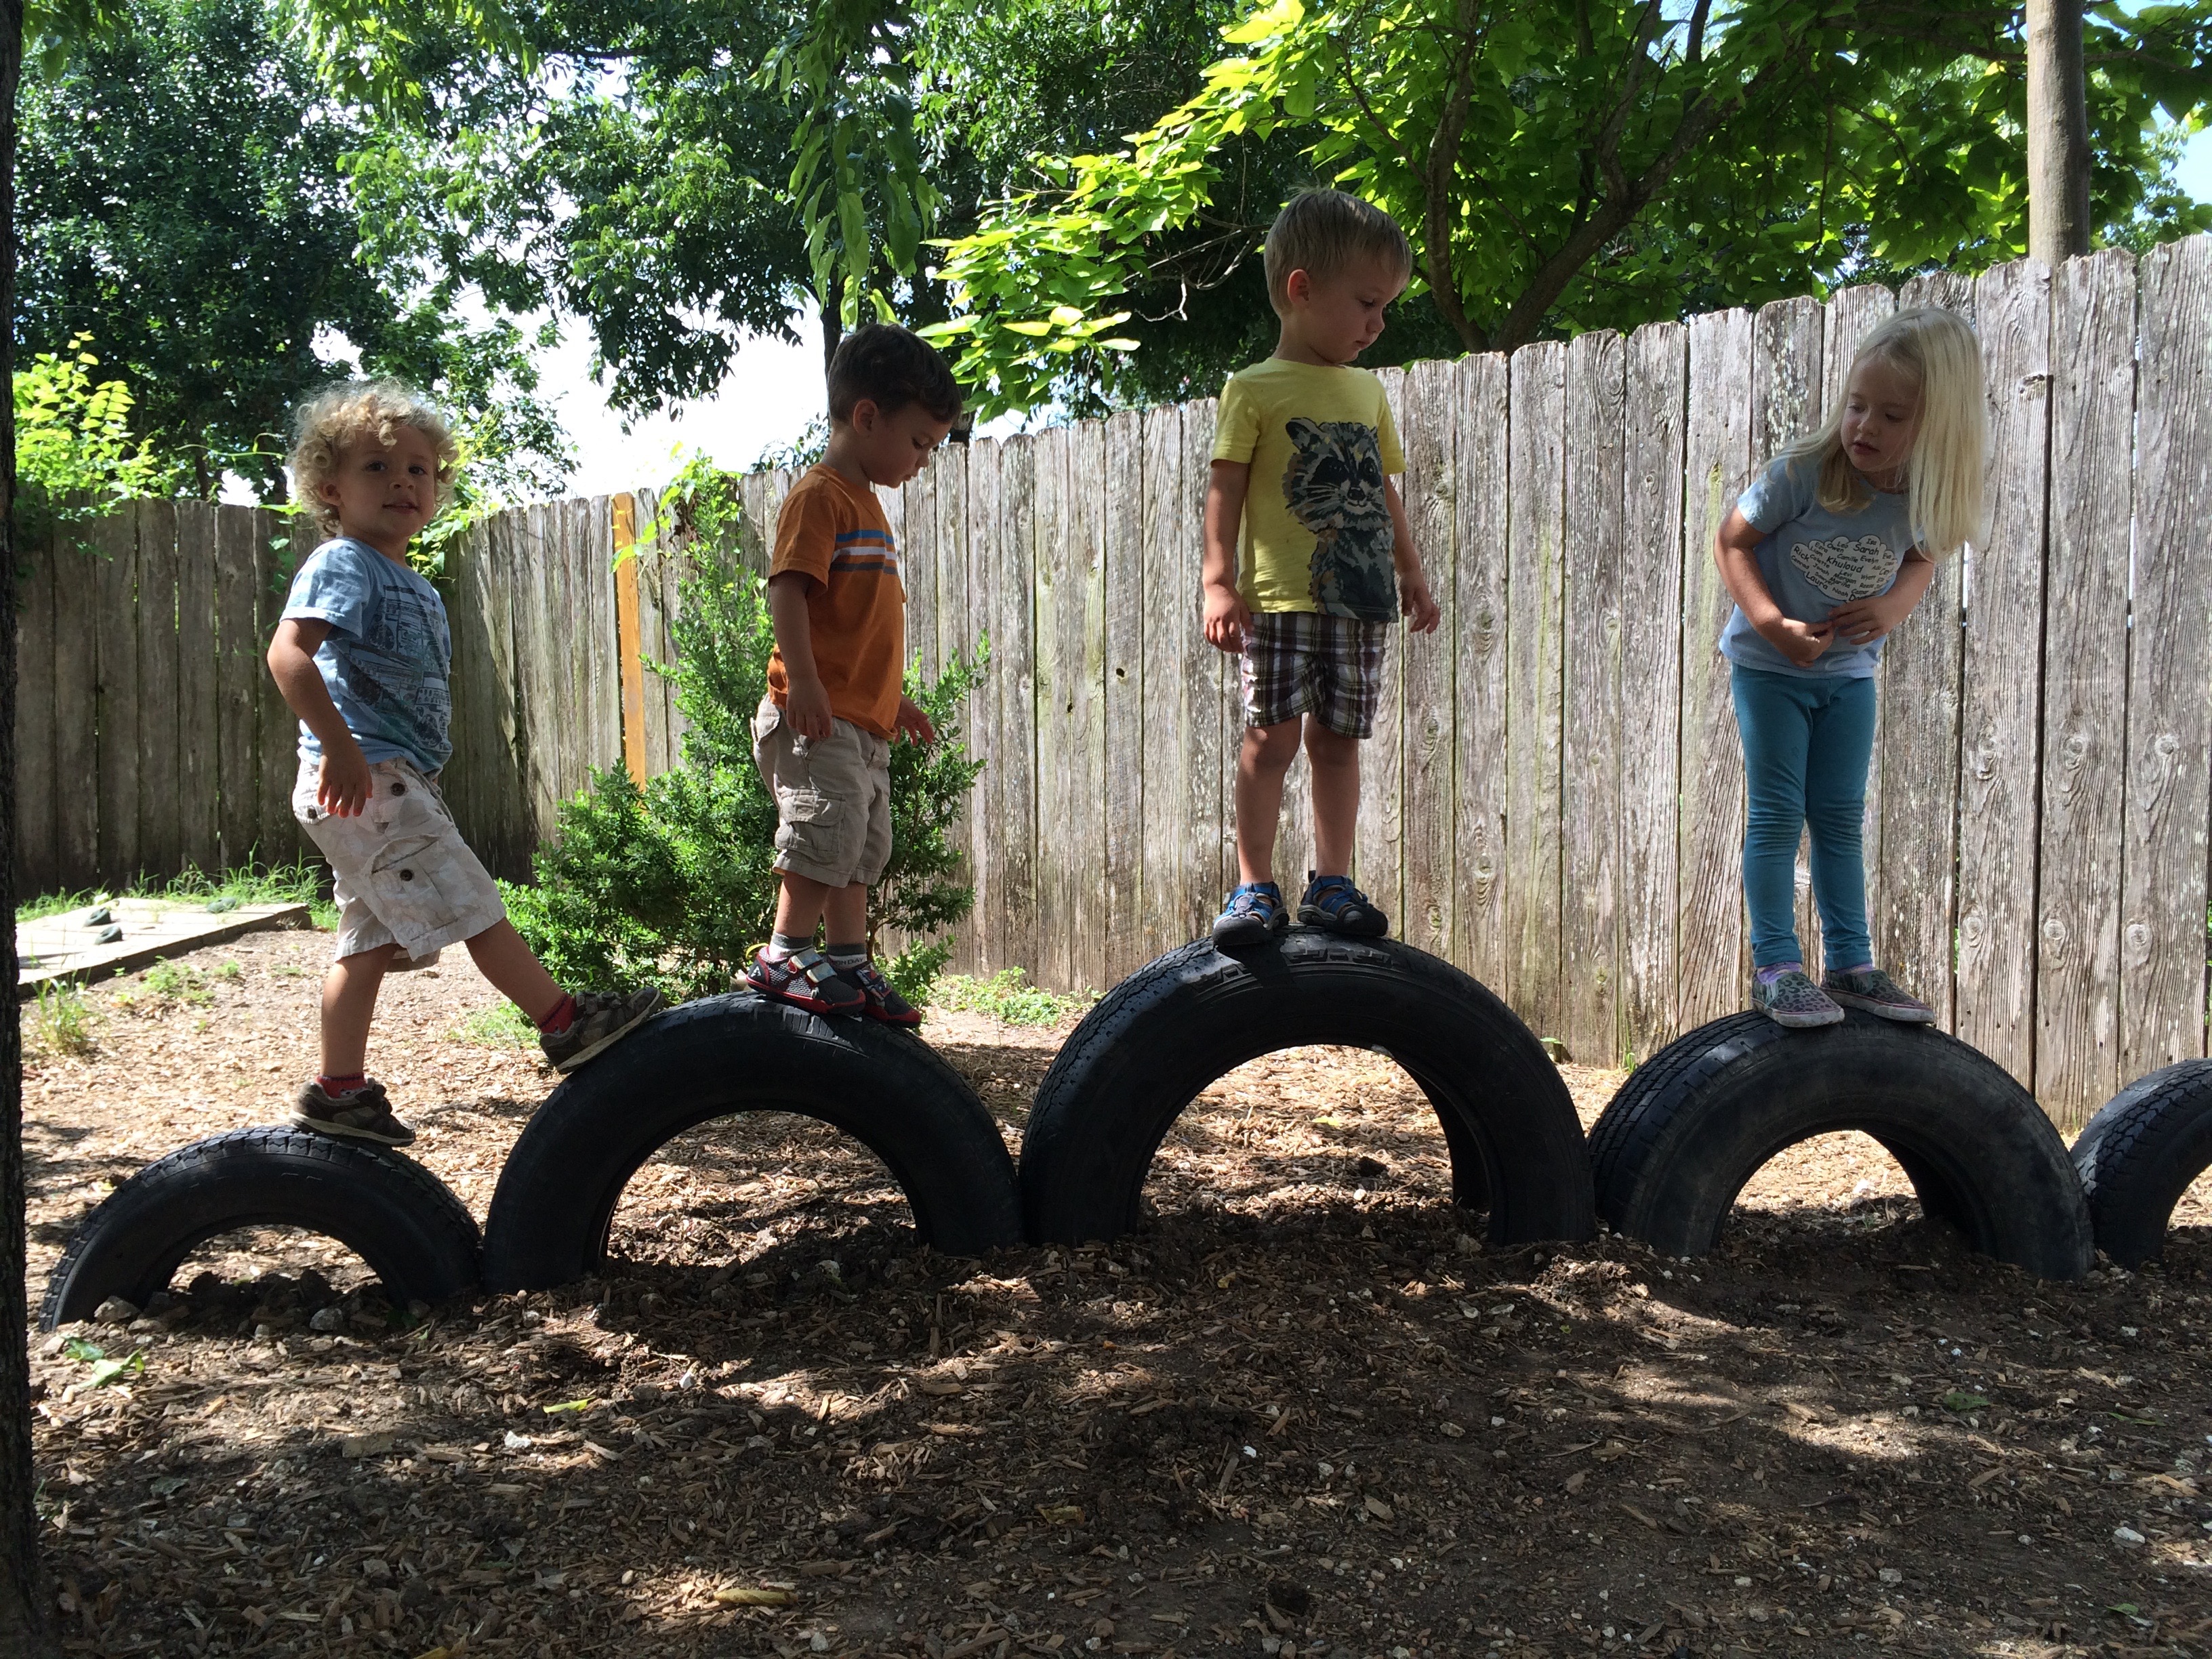 Tires at HMS playground